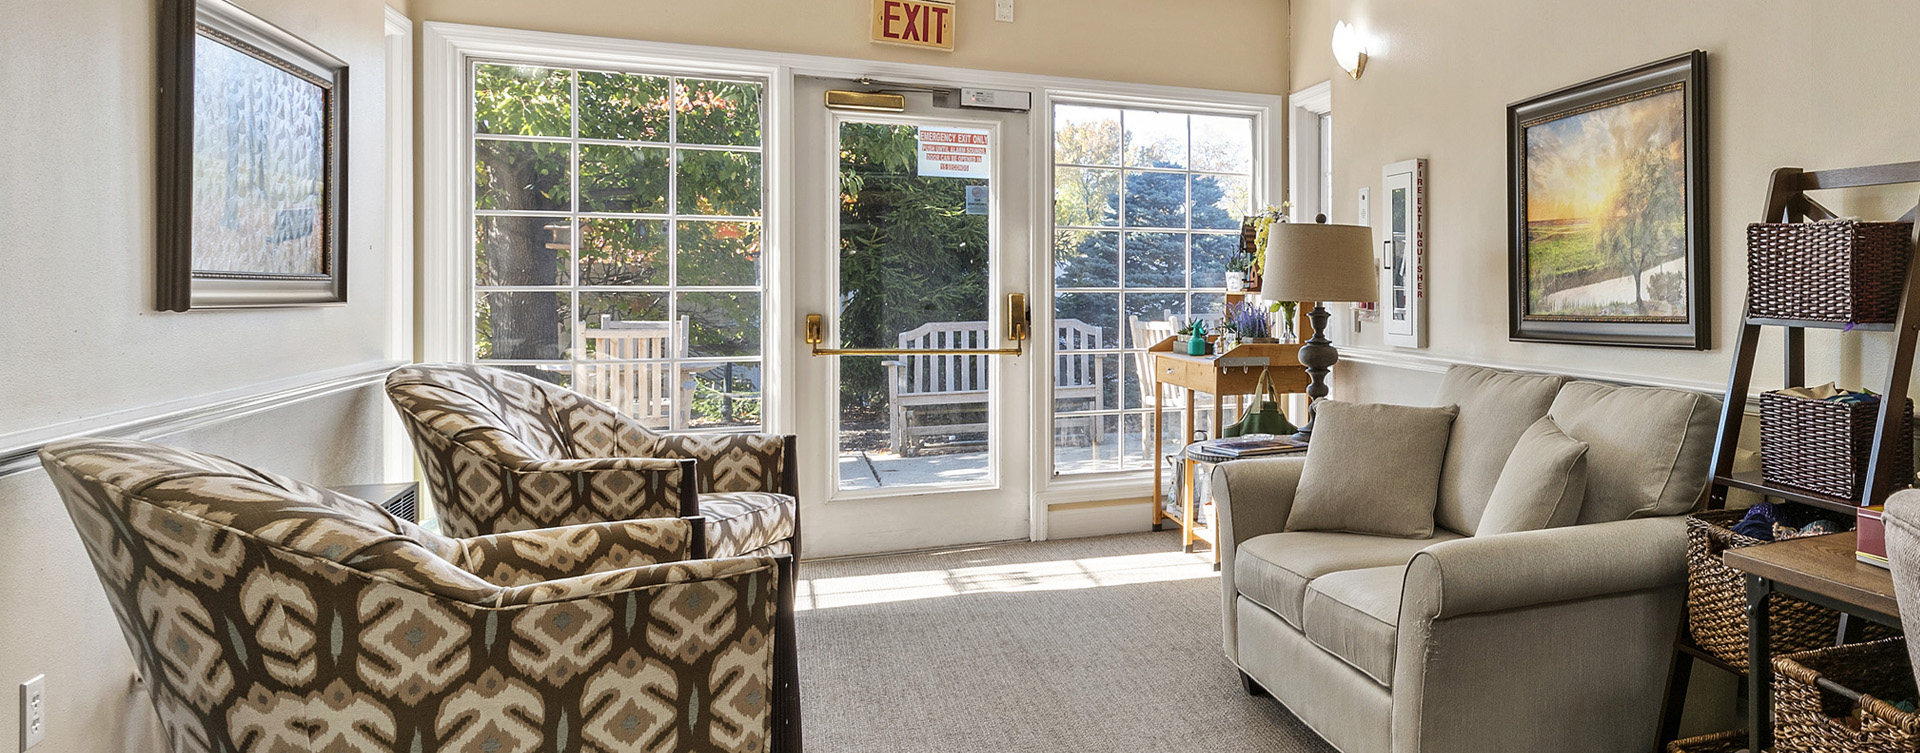 Relax in the warmth of the sunroom at Bickford of Worthington